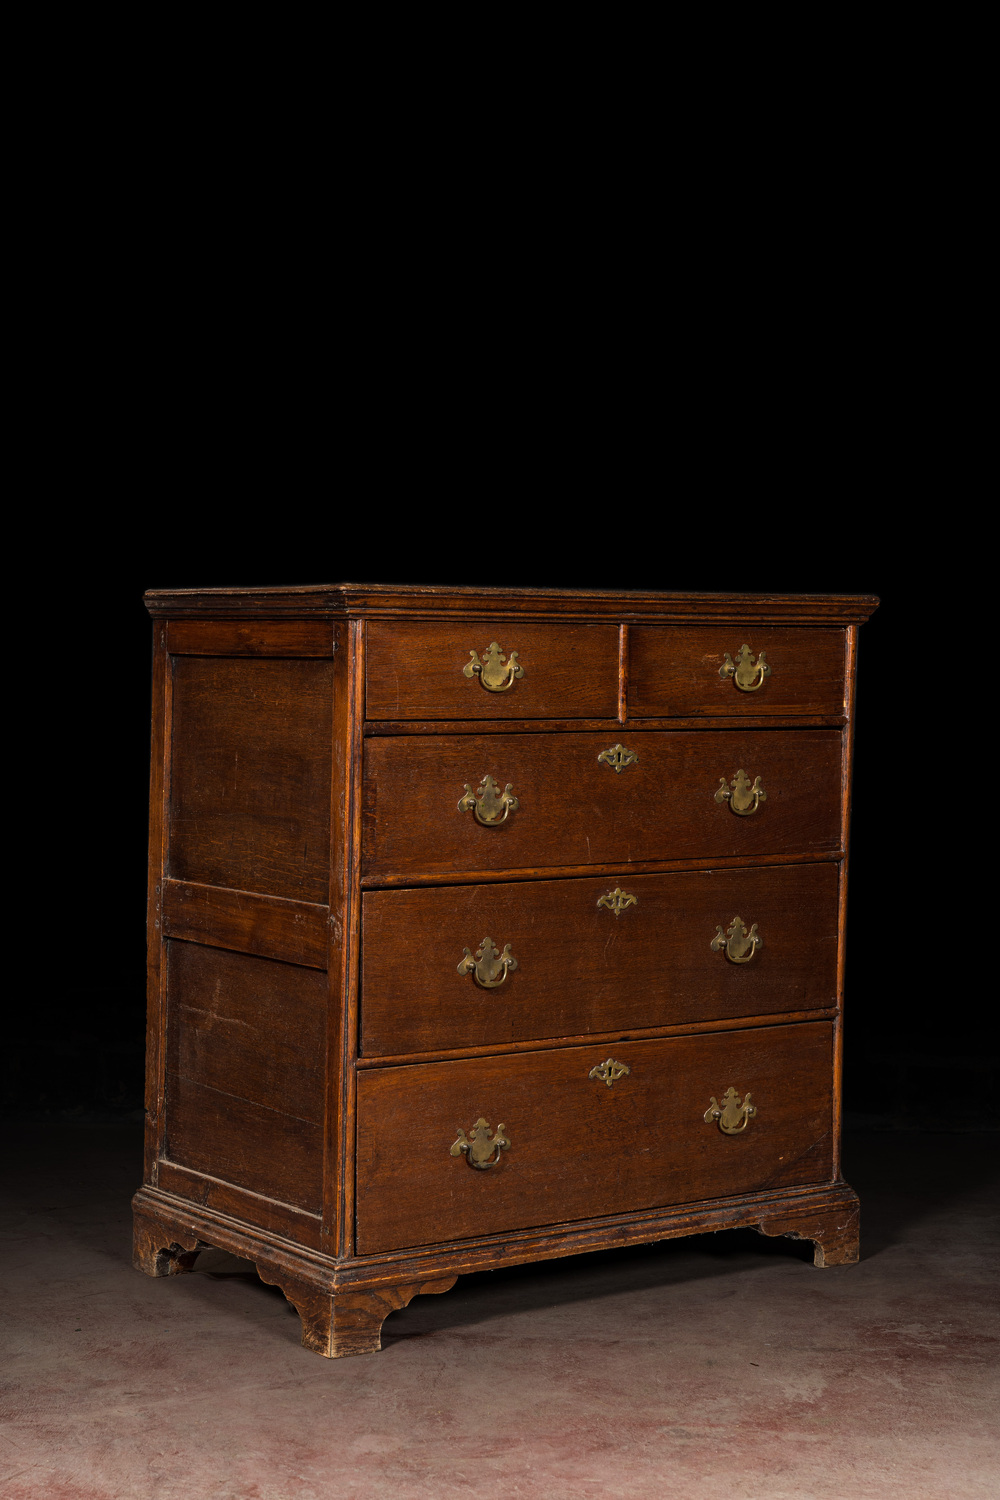 An English oak wooden chest with two short and three long drawers, 18th C.